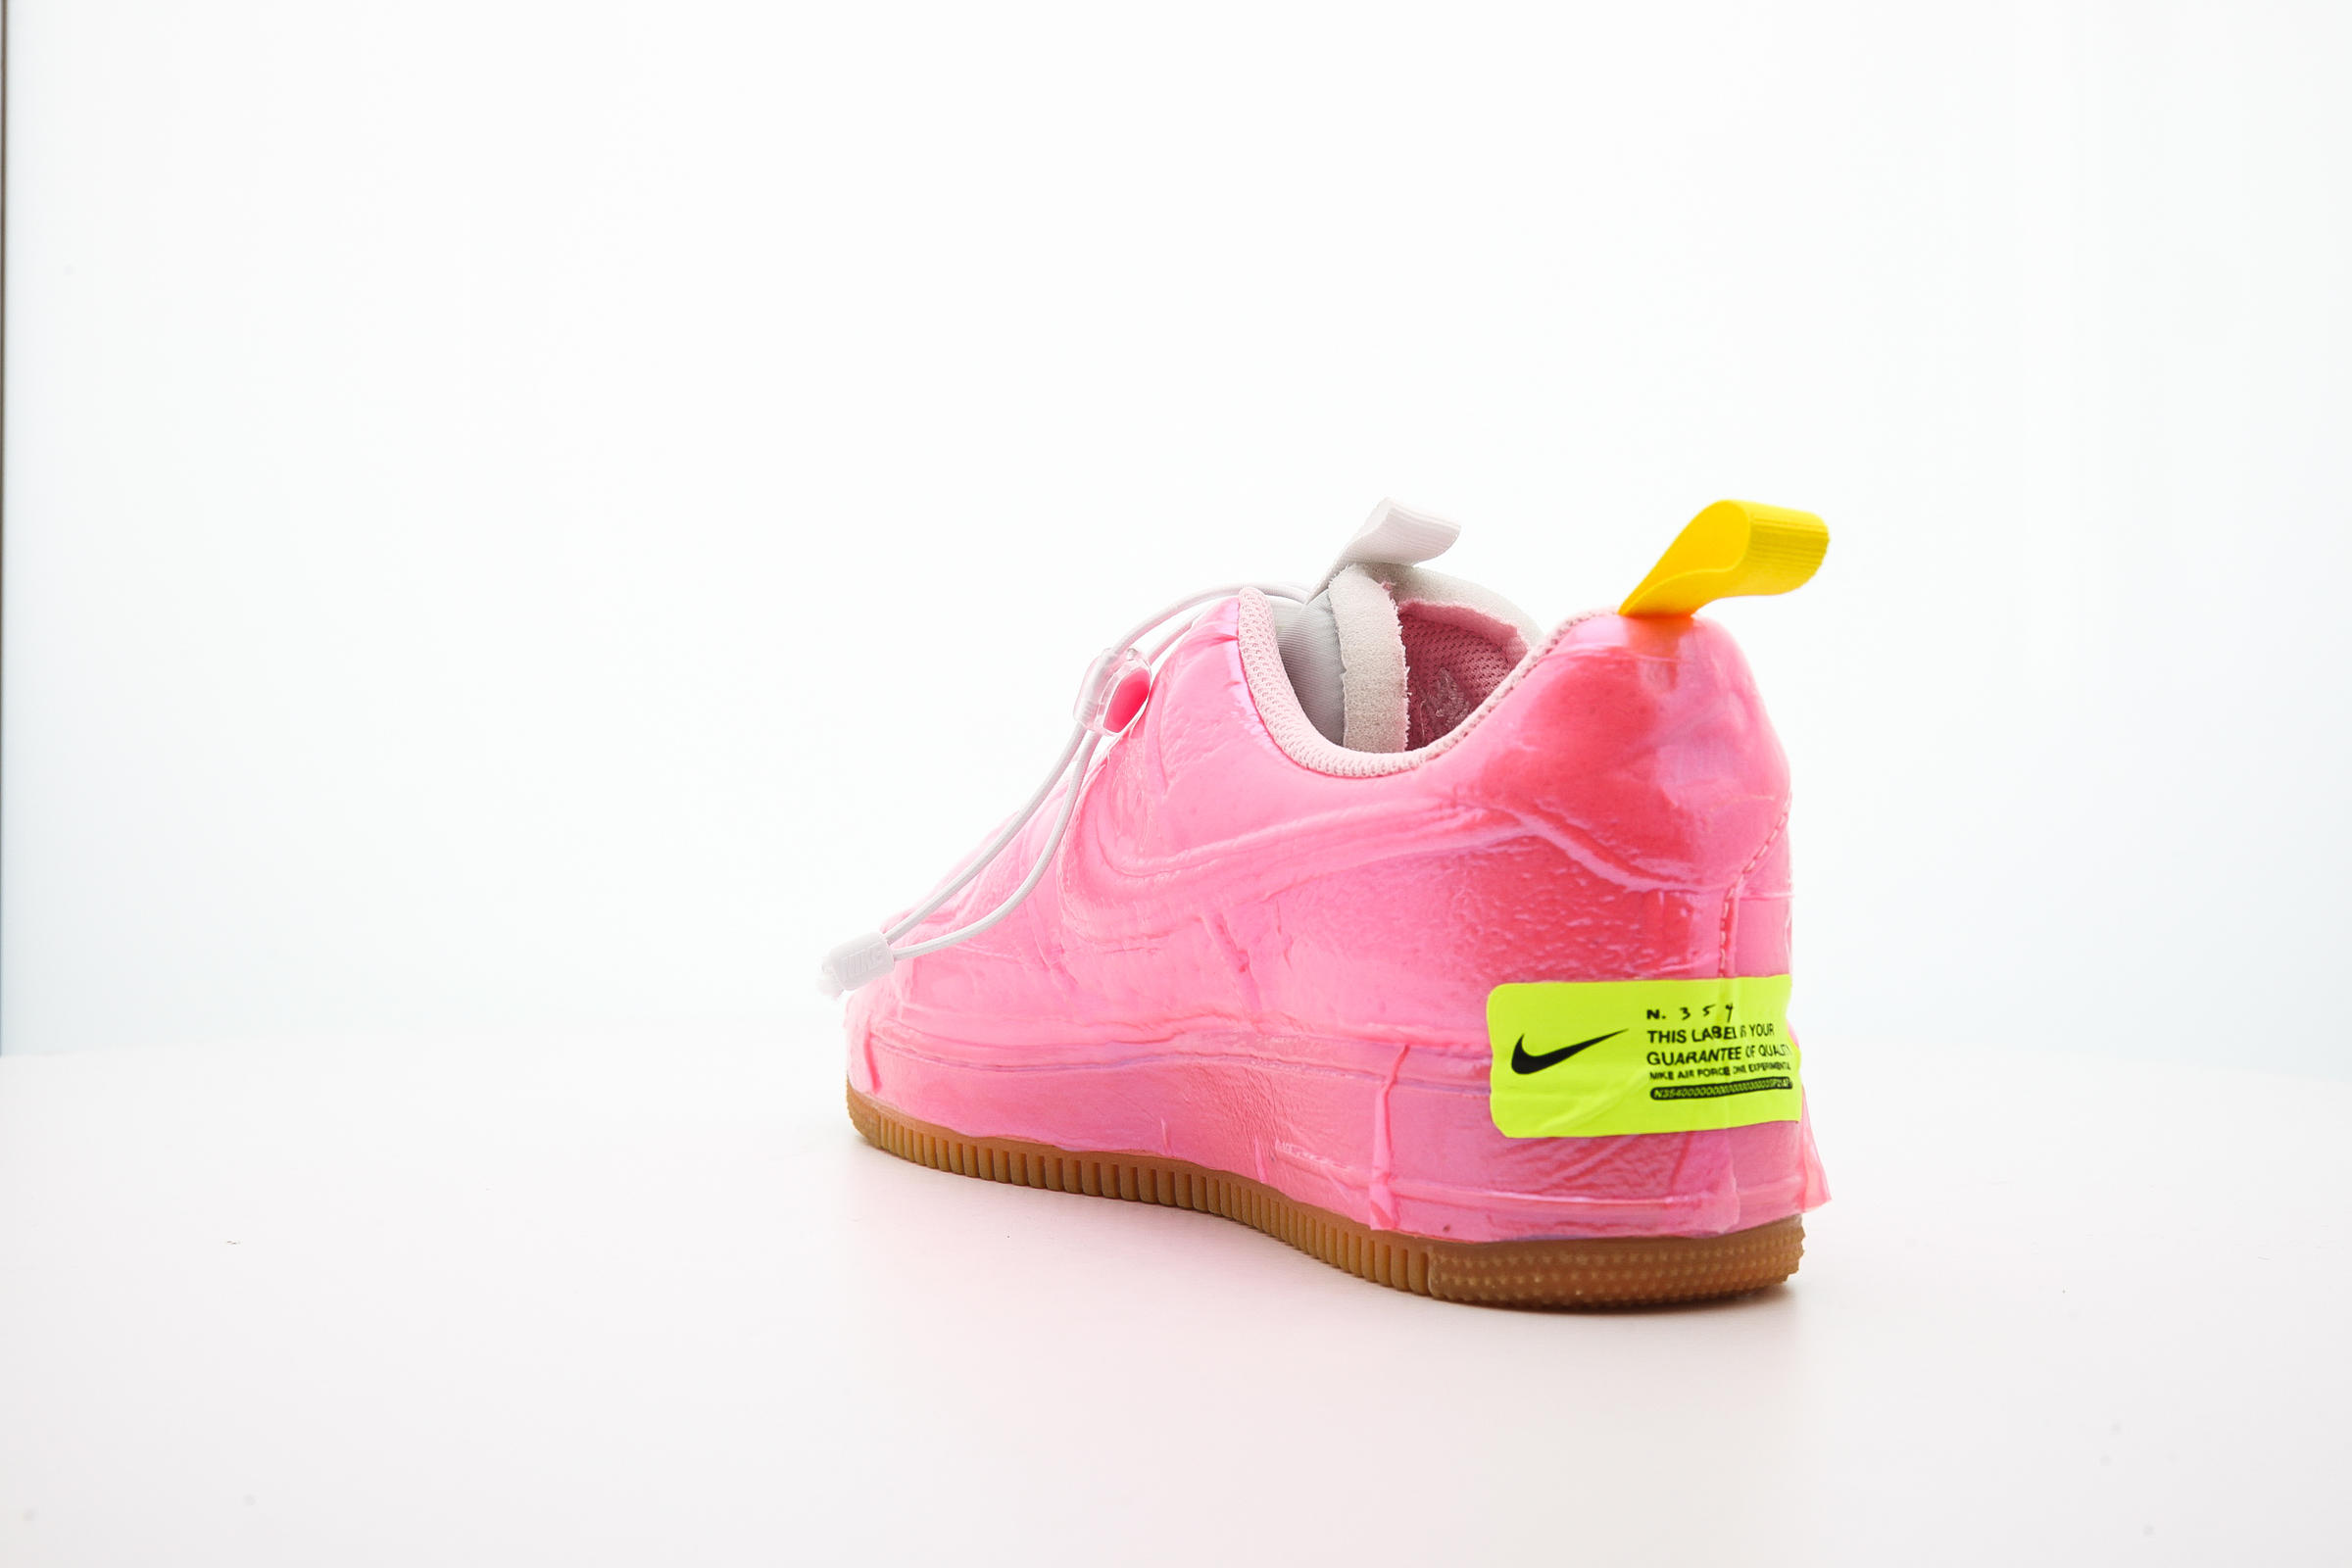 Nike AIR FORCE 1 EXPERIMENTAL "RACER PINK"